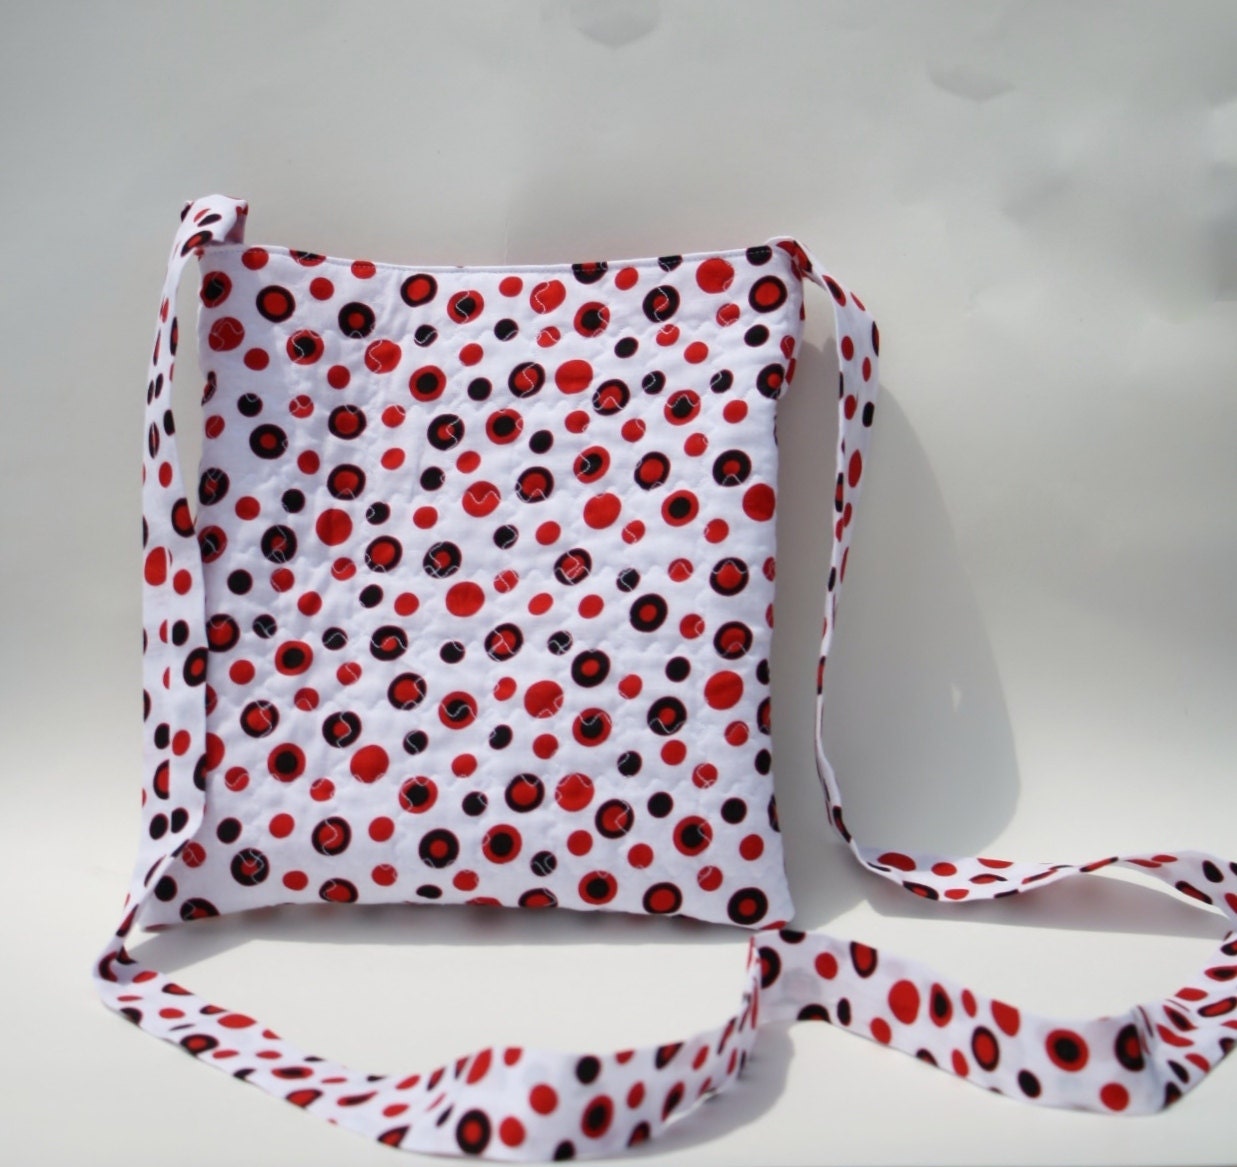 Women's Purse - Quilted Hip 2 Be Square Crossbody Purse in Red & Black Polka Dots on White - Women's Crossbody Pocketbook